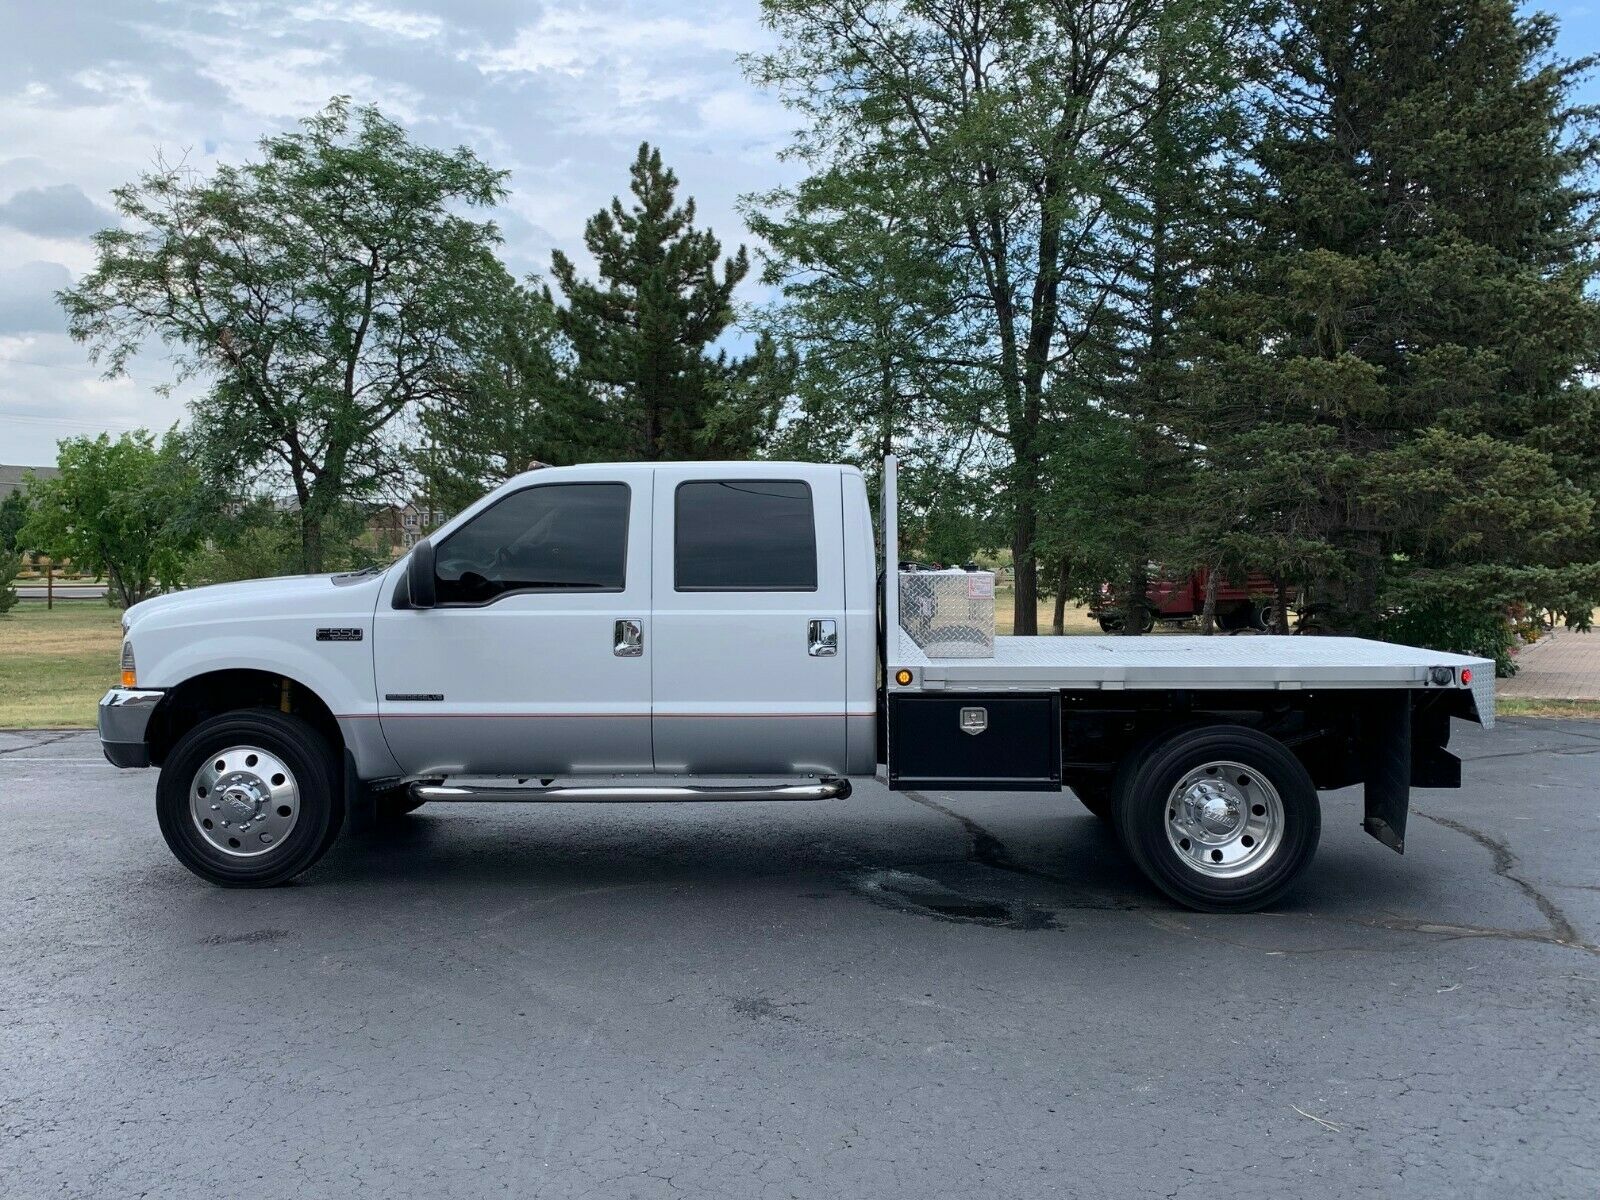 2001 Ford F-550 Xlt Immaculate Truck, 2 Owners Since New, 66,000 Miles On 7.3l Diesel Engine, Dually